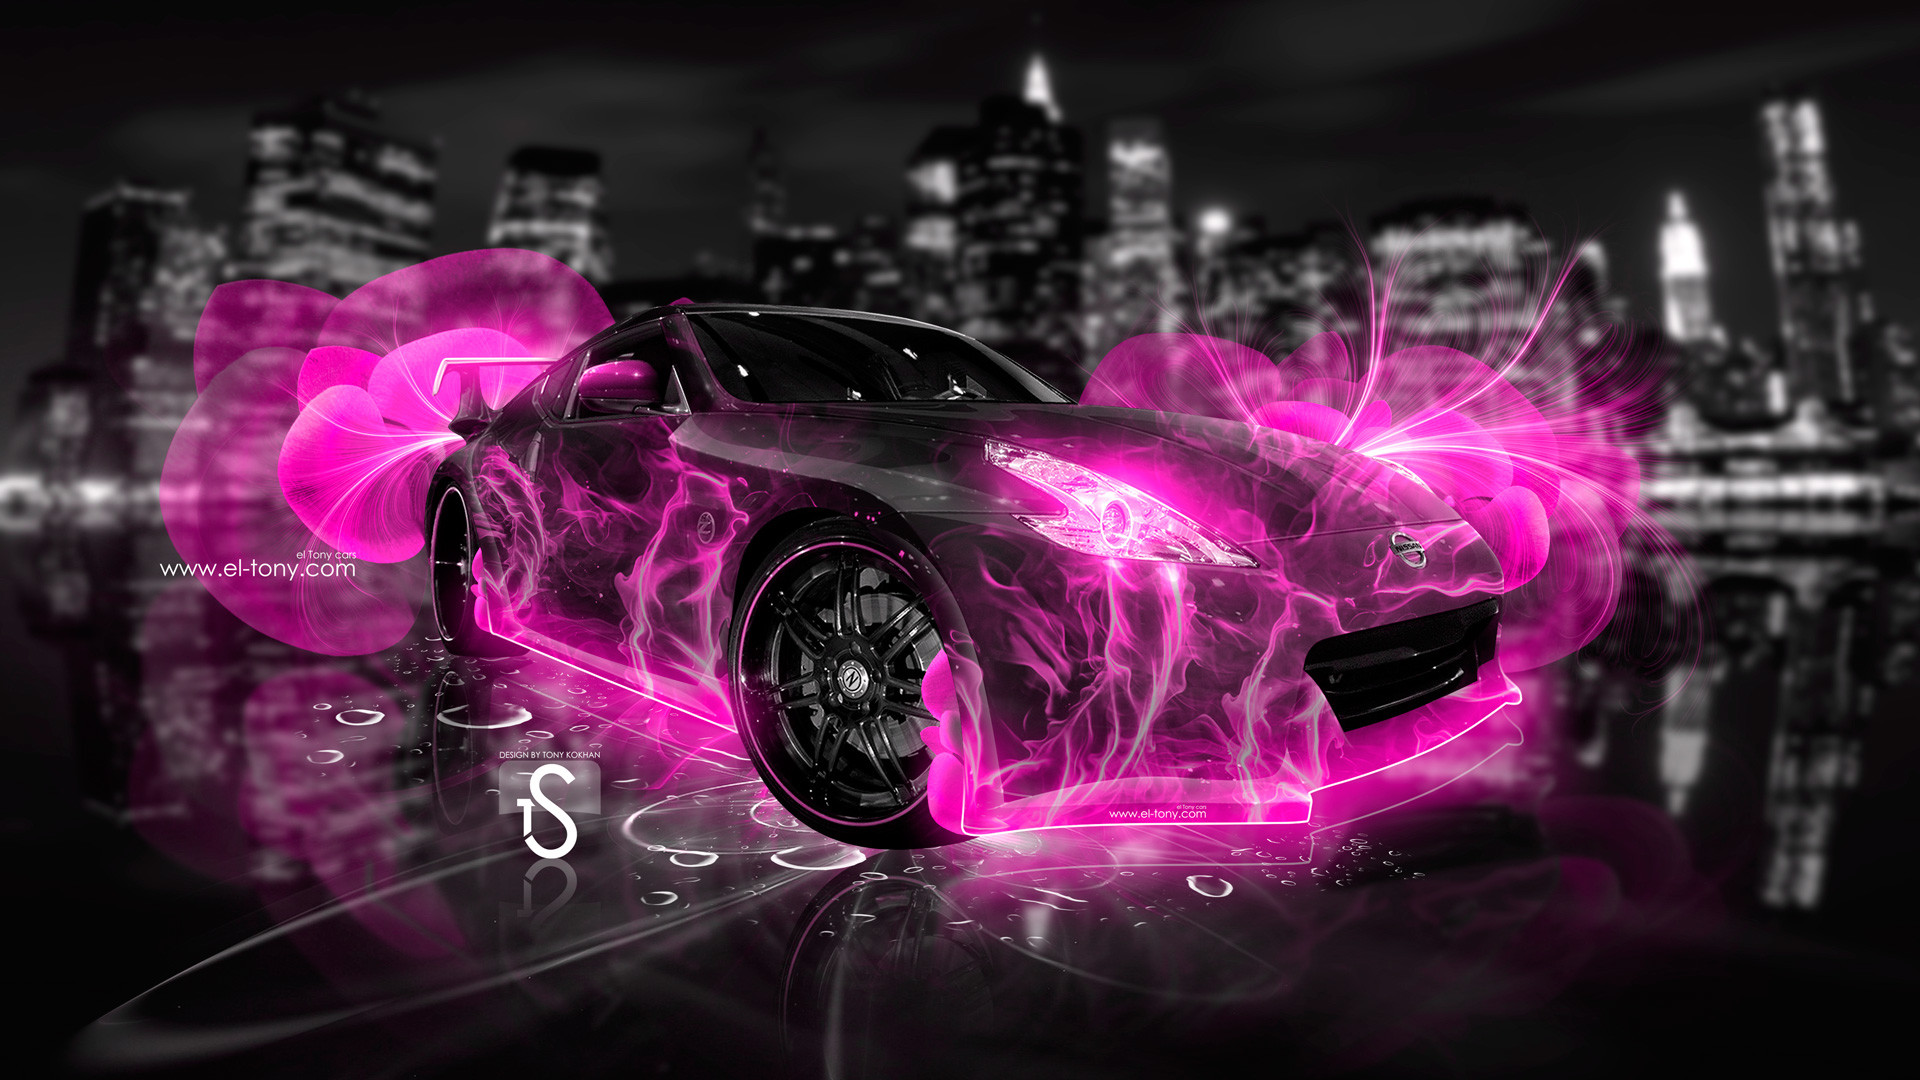 1920x1080 Nissan-370-Z-Abstract-Flowers-Neon-Pink-2013-